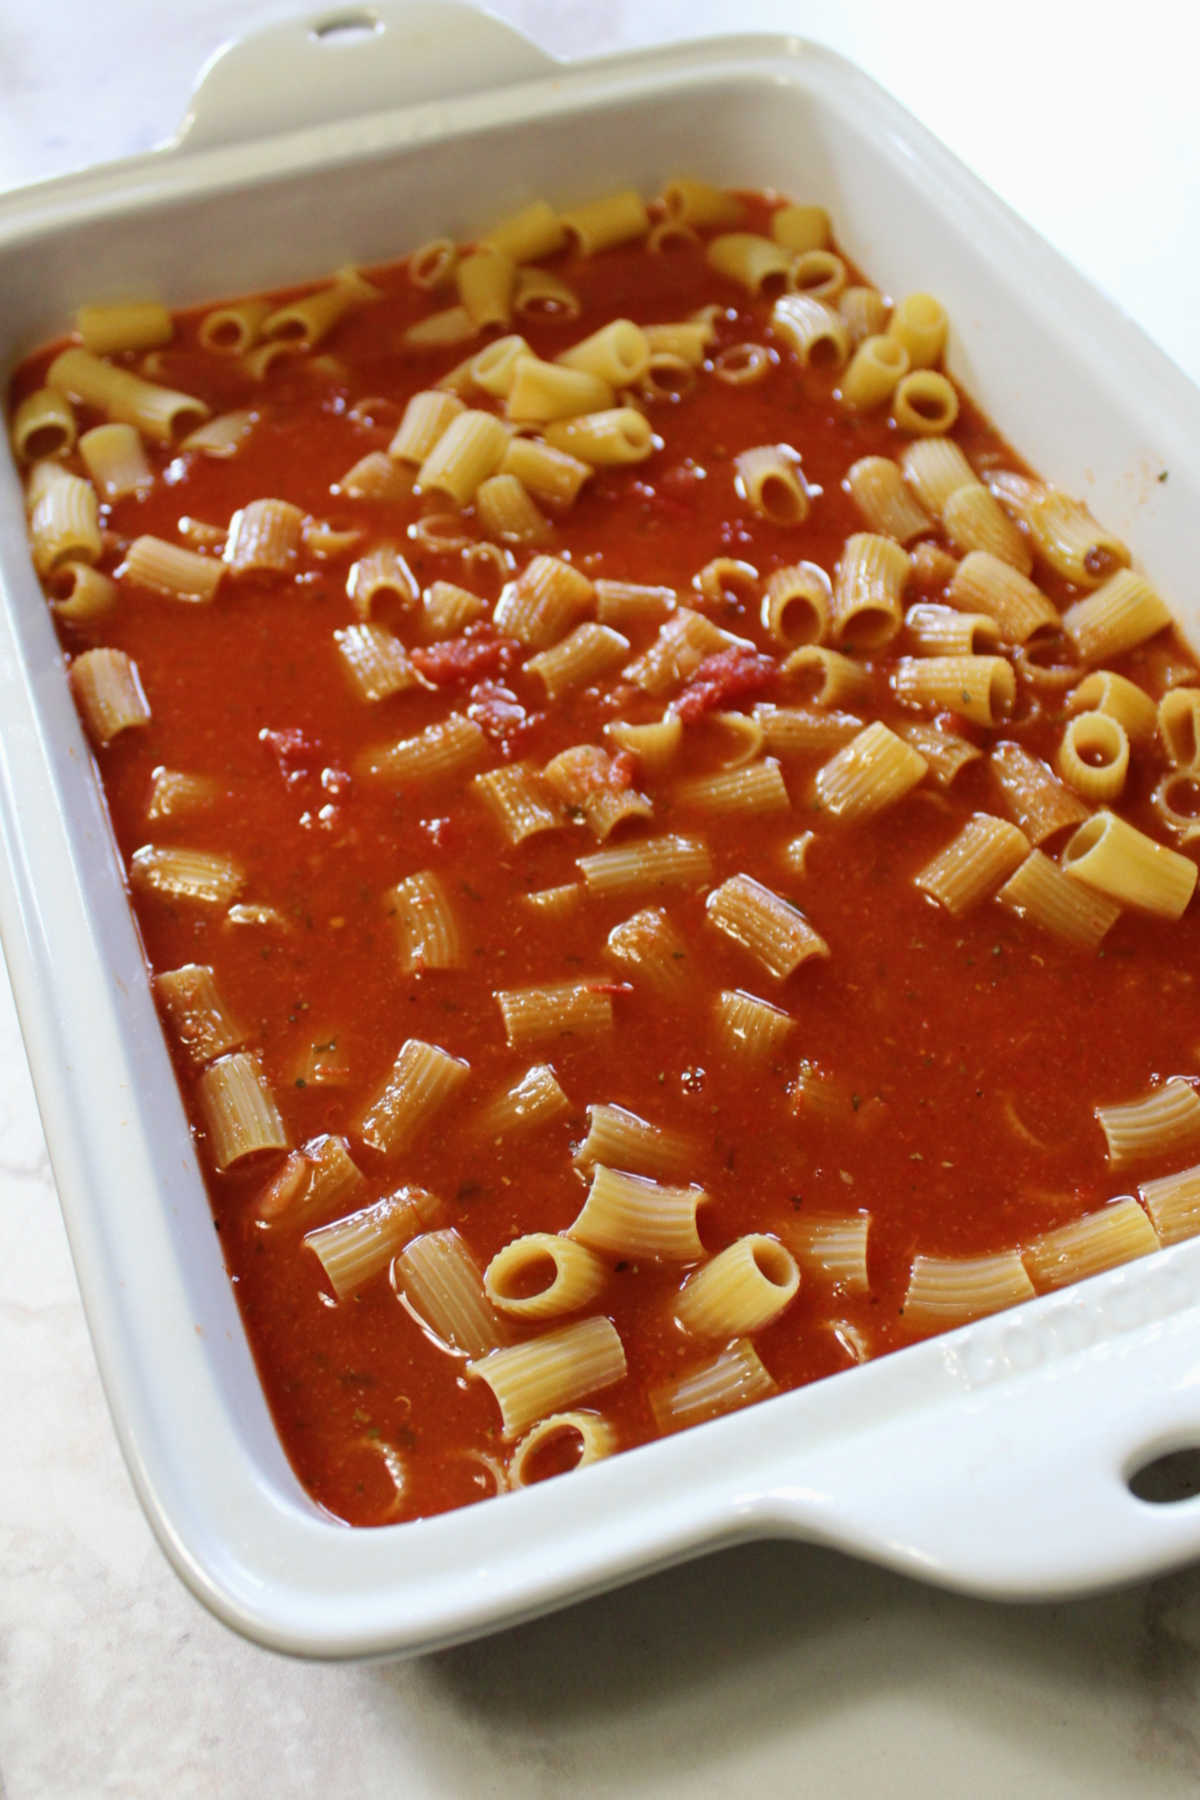 uncooked pasta and tomato sauce in baking dish ready for oven.